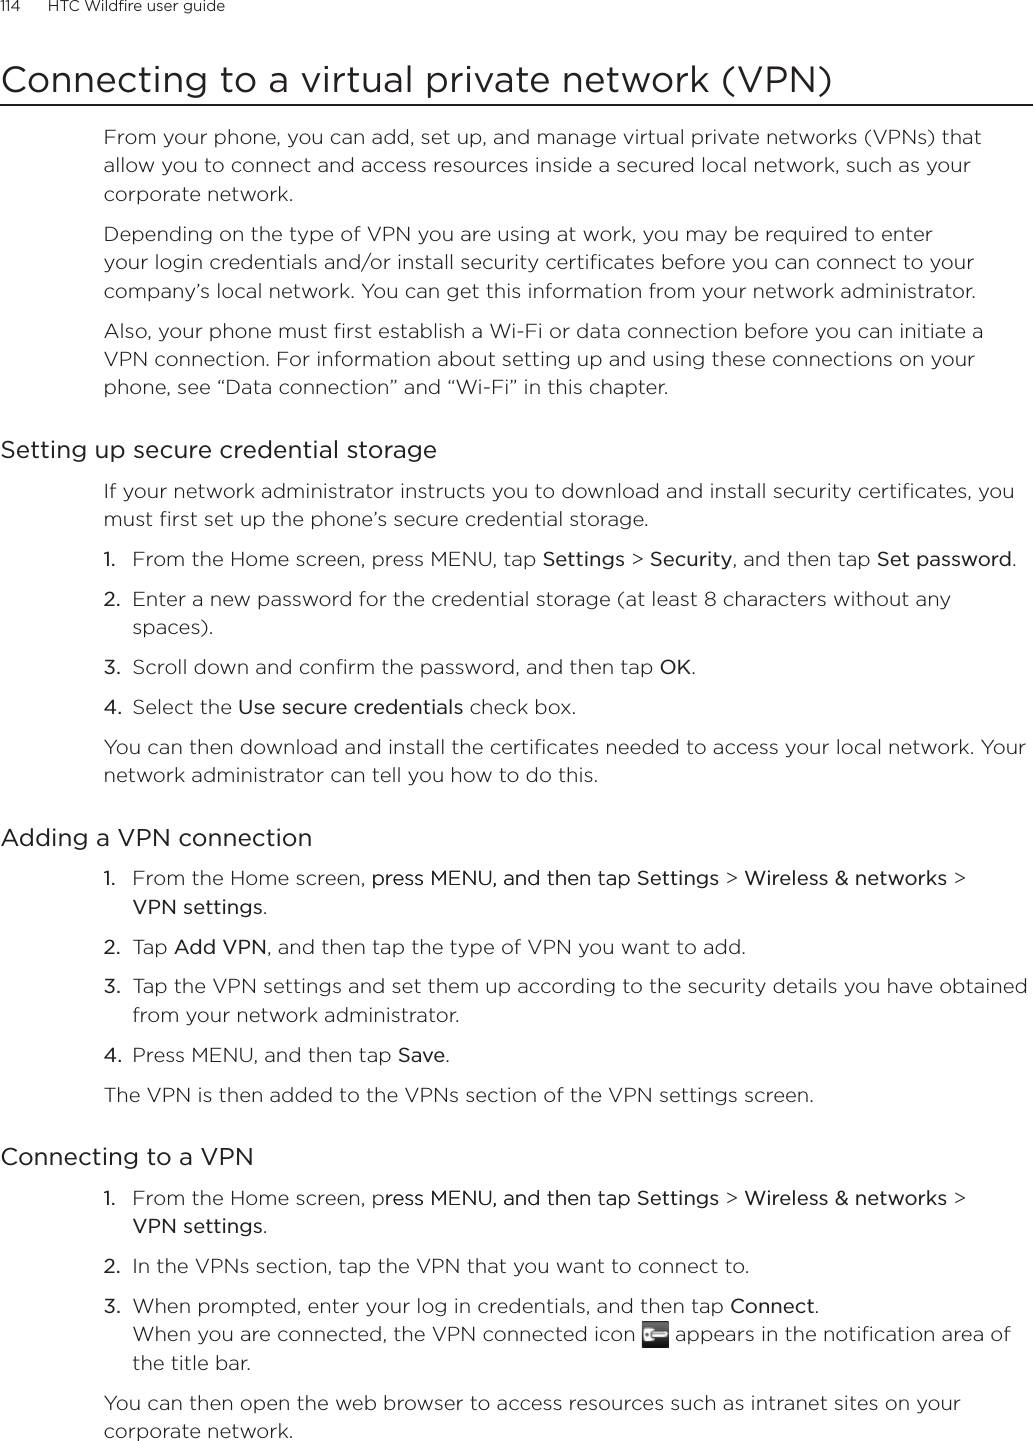 114      HTC Wildfire user guide      Connecting to a virtual private network (VPN)From your phone, you can add, set up, and manage virtual private networks (VPNs) that allow you to connect and access resources inside a secured local network, such as your corporate network.Depending on the type of VPN you are using at work, you may be required to enter your login credentials and/or install security certificates before you can connect to your company’s local network. You can get this information from your network administrator.Also, your phone must first establish a Wi-Fi or data connection before you can initiate a VPN connection. For information about setting up and using these connections on your phone, see “Data connection” and “Wi-Fi” in this chapter.Setting up secure credential storageIf your network administrator instructs you to download and install security certificates, you must first set up the phone’s secure credential storage.From the Home screen, press MENU, tap Settings &gt; Security, and then tap Set password.Enter a new password for the credential storage (at least 8 characters without any spaces). Scroll down and confirm the password, and then tap OK.Select the Use secure credentials check box.You can then download and install the certificates needed to access your local network. Your network administrator can tell you how to do this.Adding a VPN connectionFrom the Home screen, press MENU, and then tappress MENU, and then tap Settings &gt; Wireless &amp; networks &gt;  VPN settings.Tap Add VPN, and then tap the type of VPN you want to add.Tap the VPN settings and set them up according to the security details you have obtained from your network administrator.Press MENU, and then tap Save.The VPN is then added to the VPNs section of the VPN settings screen.Connecting to a VPNFrom the Home screen, press MENU, and then tapress MENU, and then tap Settings &gt; Wireless &amp; networks &gt;  VPN settings.In the VPNs section, tap the VPN that you want to connect to.When prompted, enter your log in credentials, and then tap Connect. When you are connected, the VPN connected icon   appears in the notification area of the title bar.You can then open the web browser to access resources such as intranet sites on your corporate network.1.2.3.4.1.2.3.4.1.2.3.